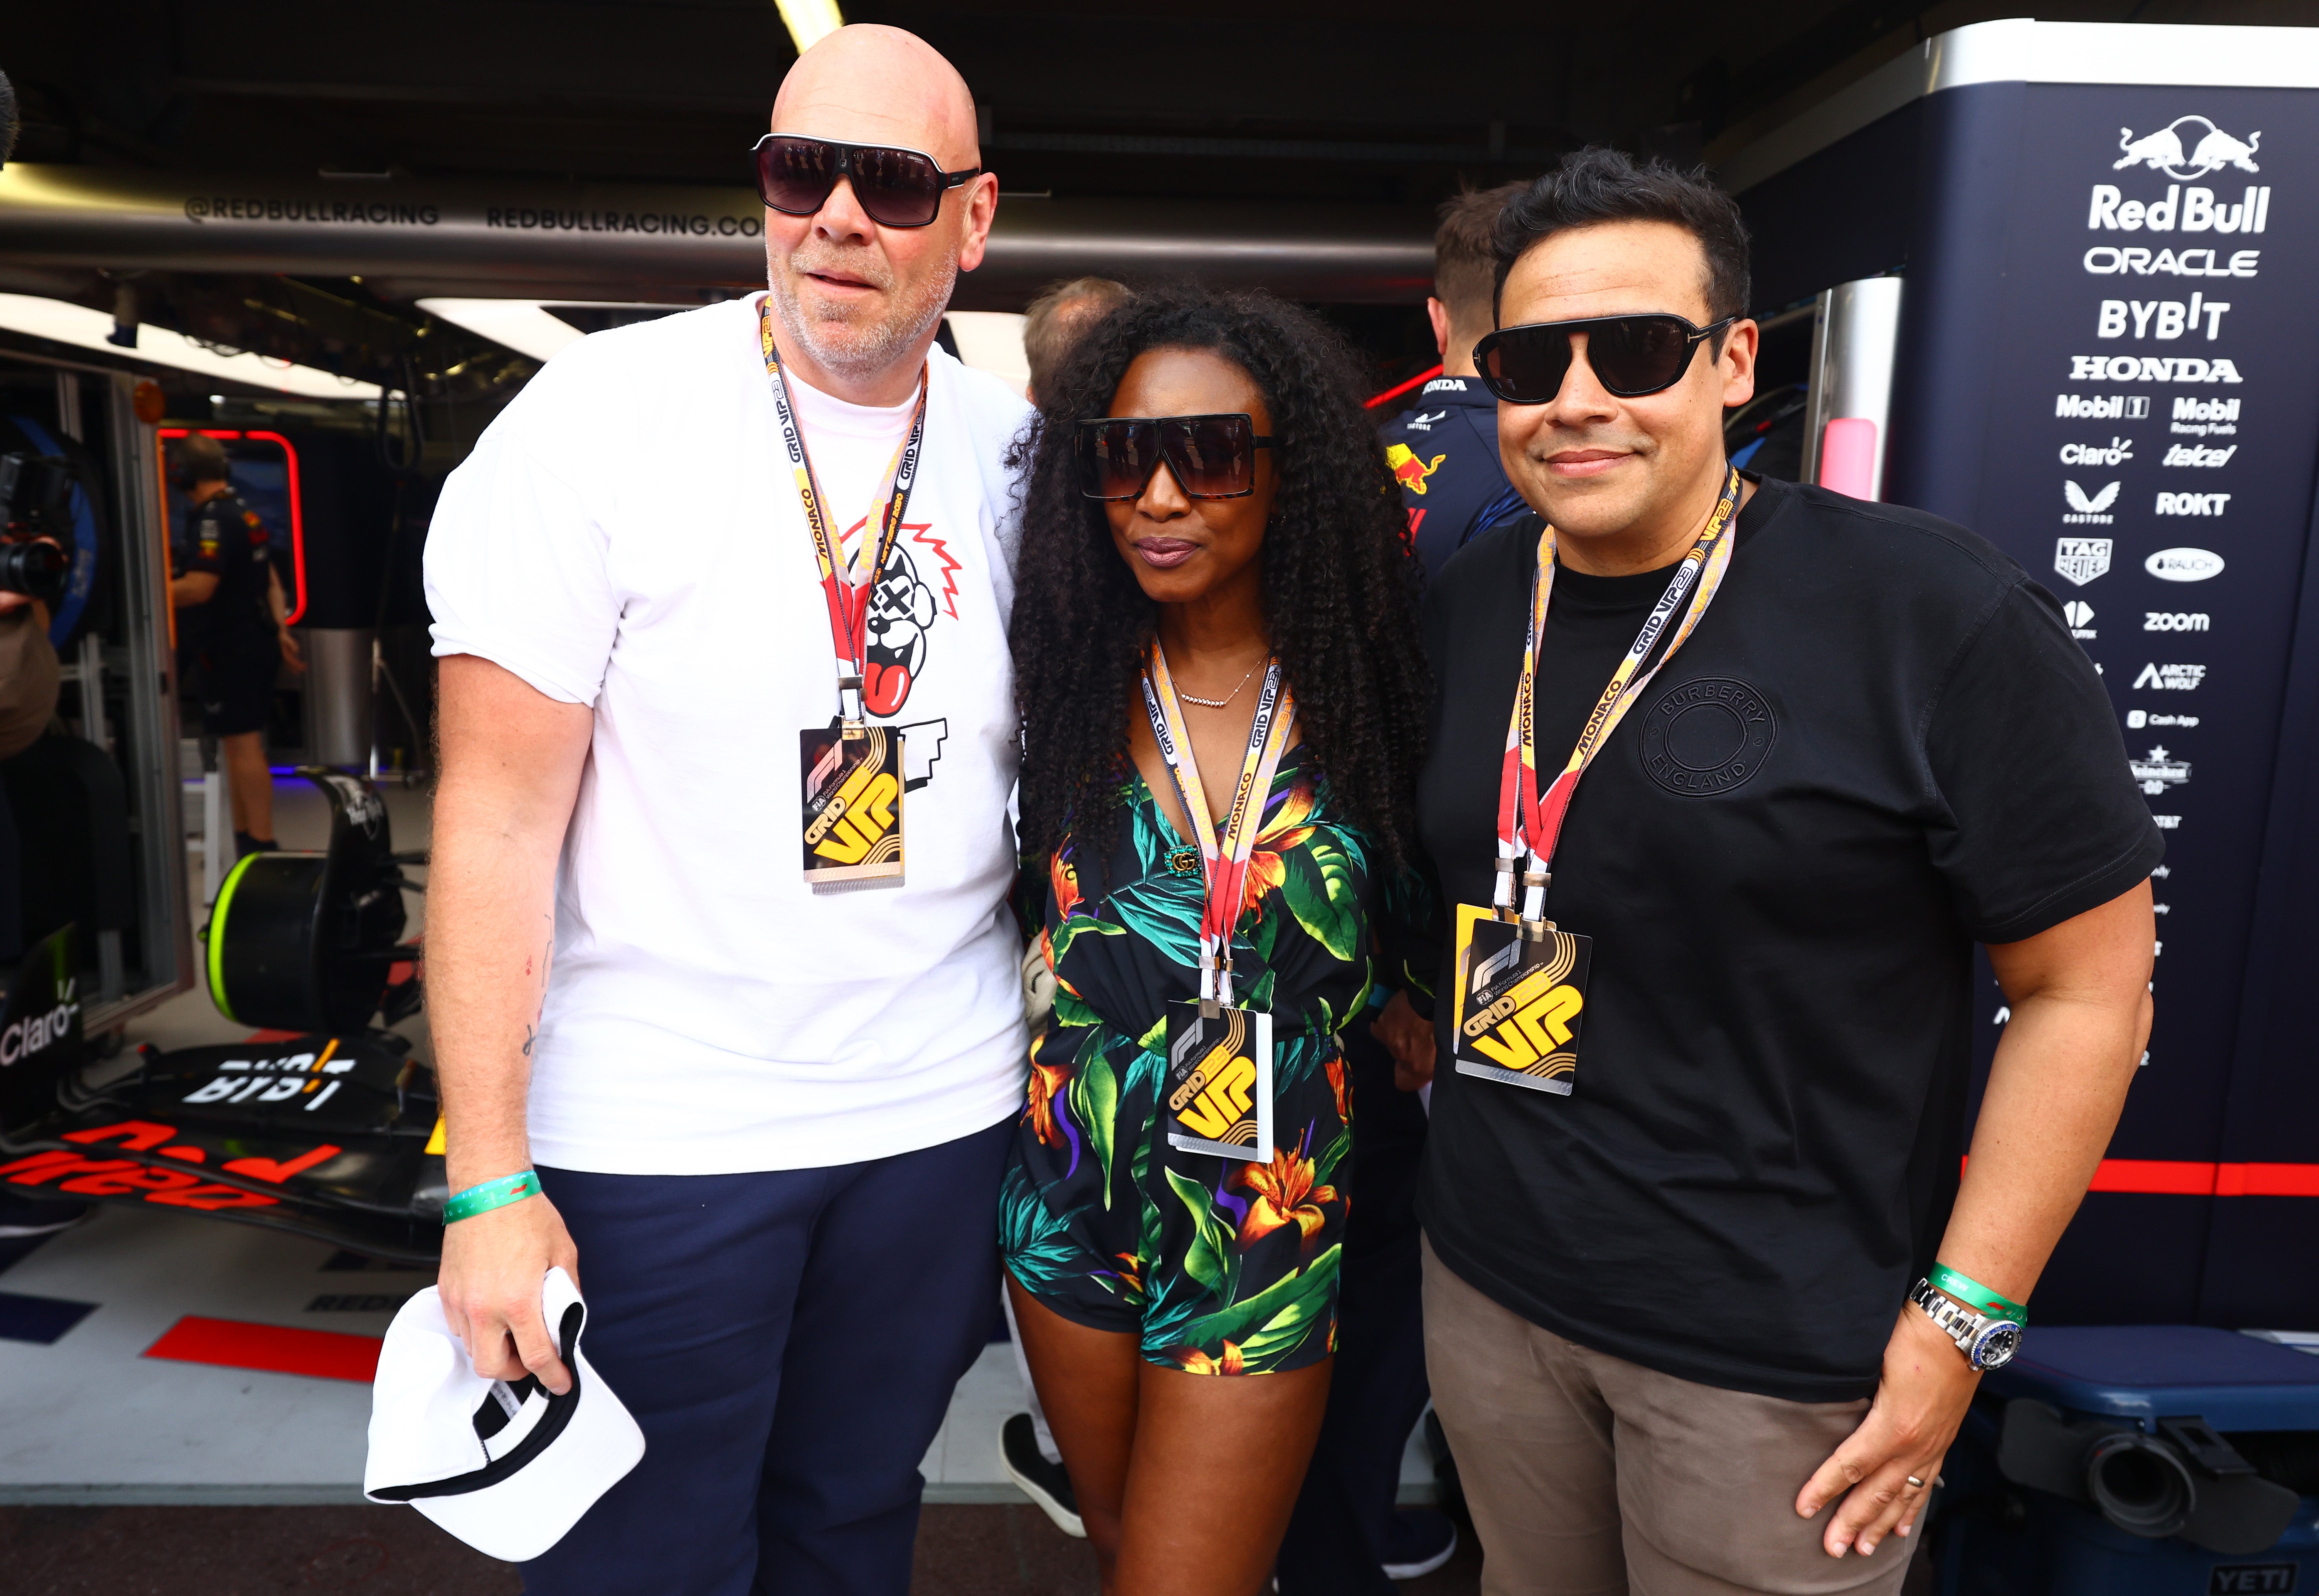 Tom Kerridge, Beverley Knight and Paul Ainsworth pose for a photo outside the Red Bull Racing garage prior to the F1 Grand Prix of Monaco at Circuit de Monaco on May 28, 2023